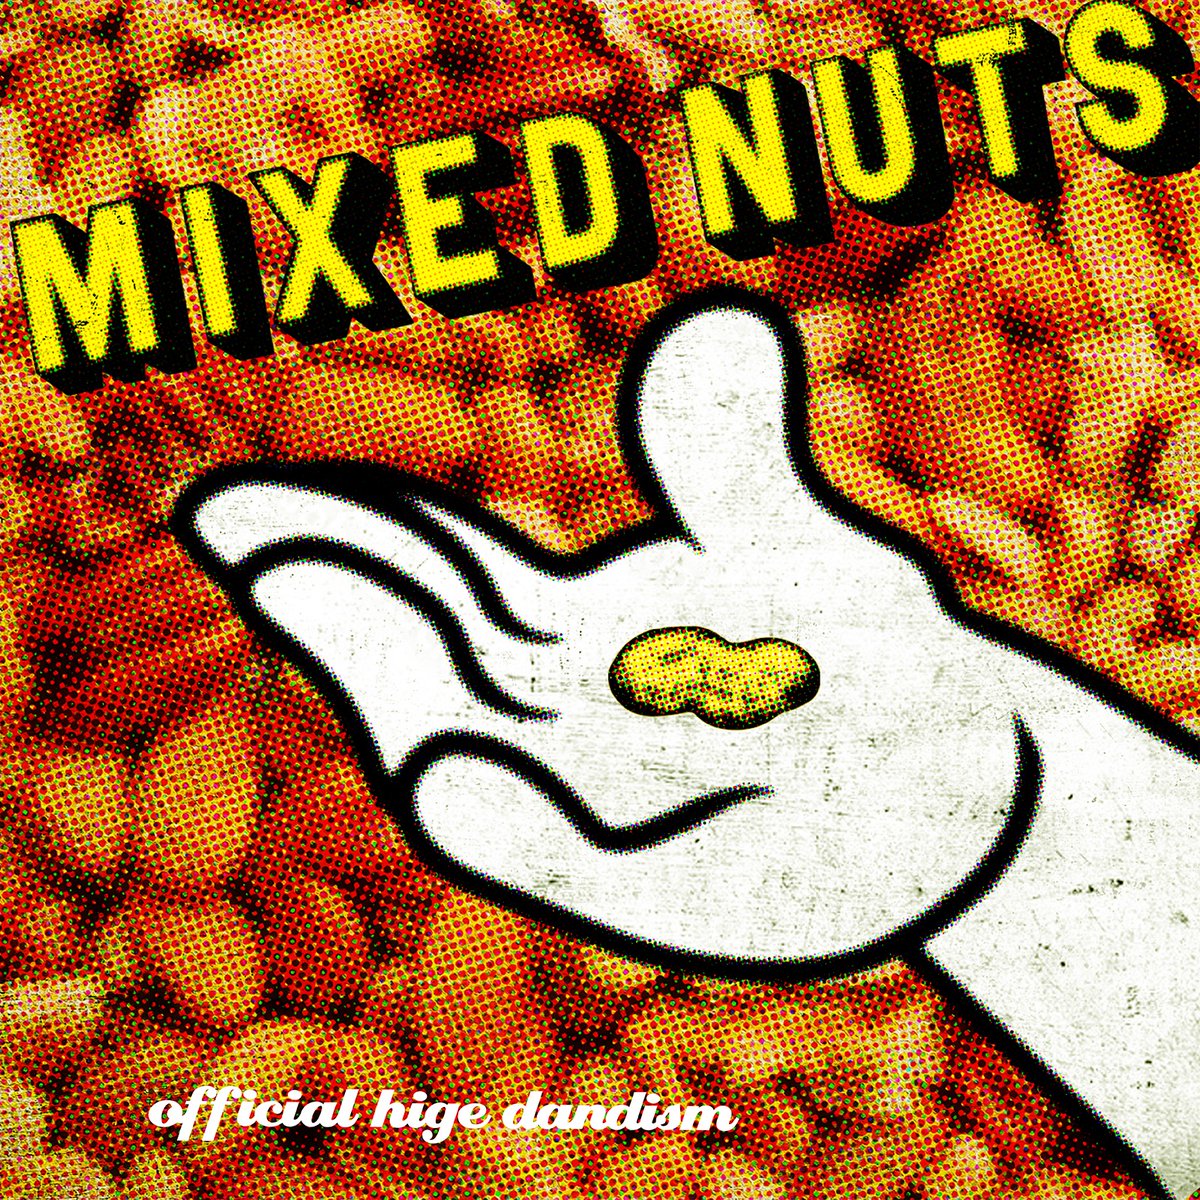 Cover for『Official HIGE DANdism - Mixed Nuts』from the release『Mixed Nuts EP』